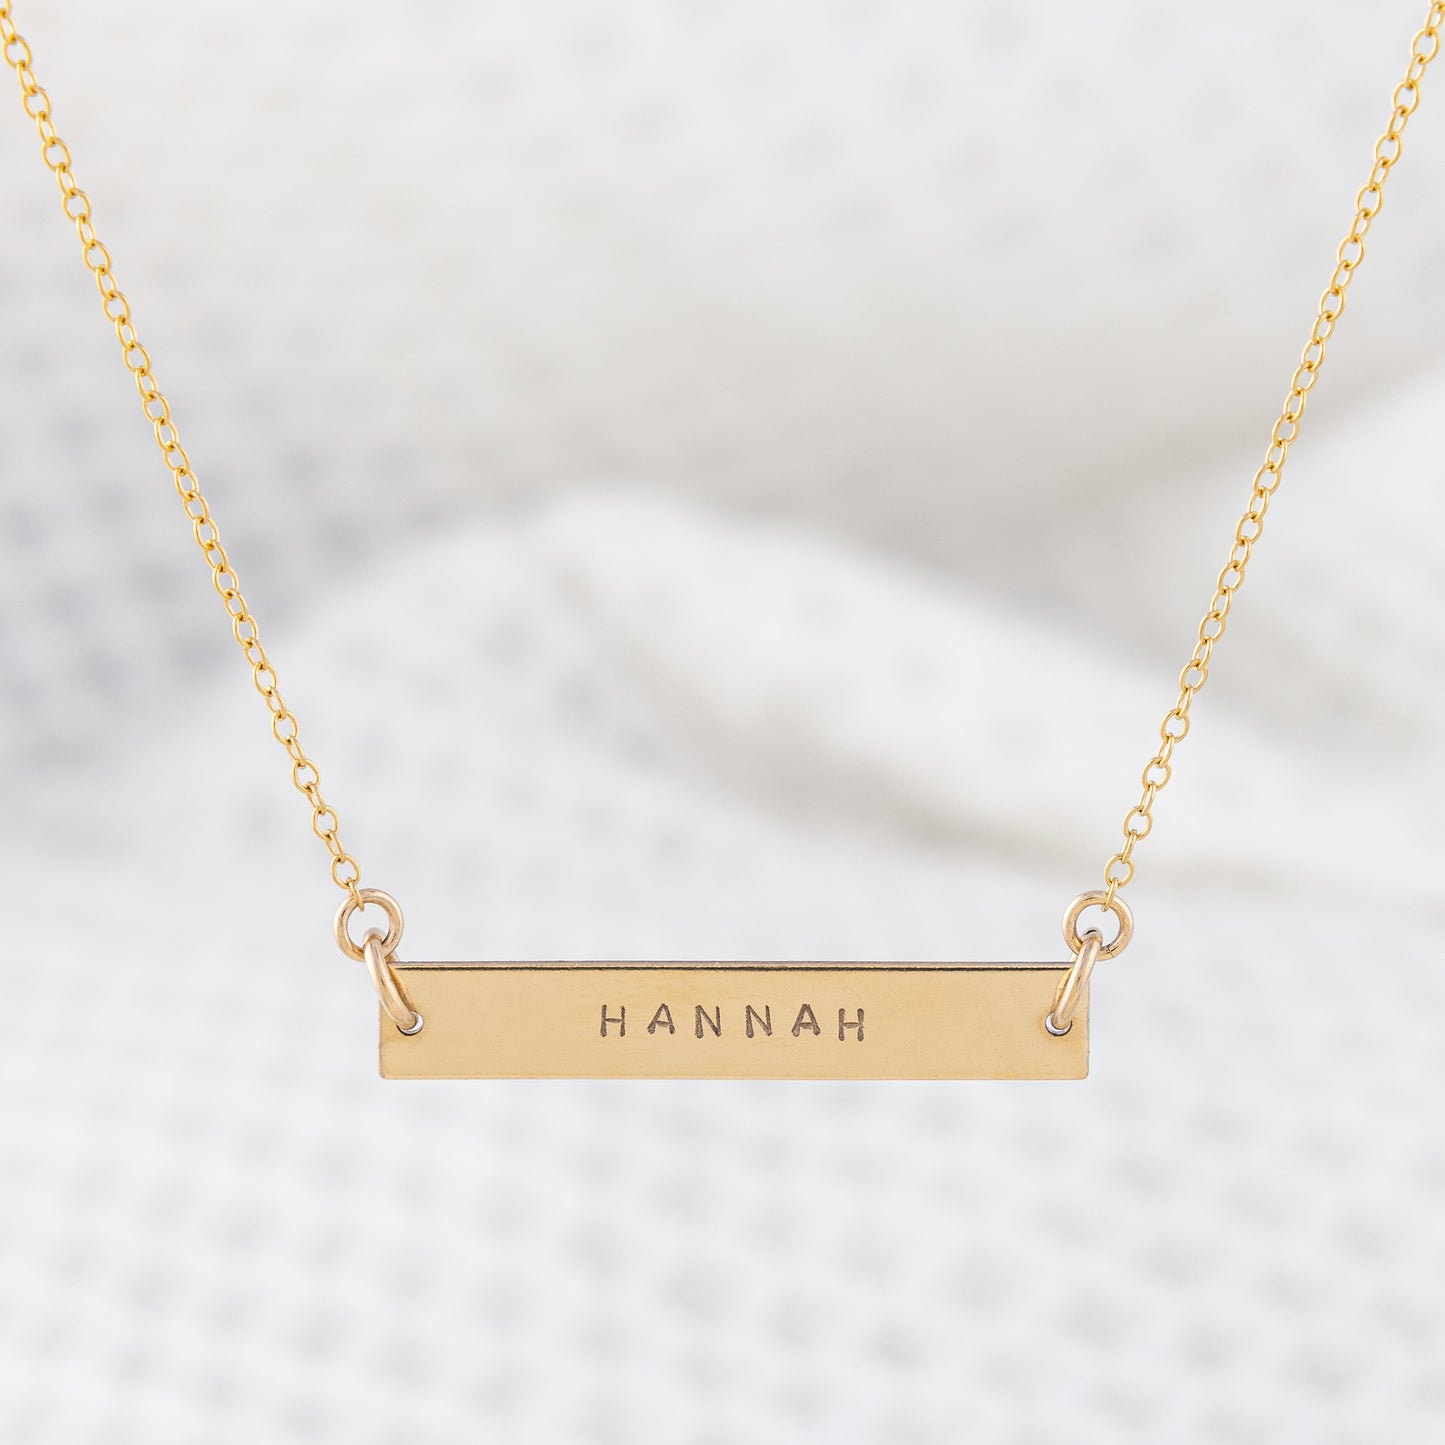 14ct gold-filled gold name bar necklace. A smooth, gold, bar pendant hand stamped with name on a fine gold chain